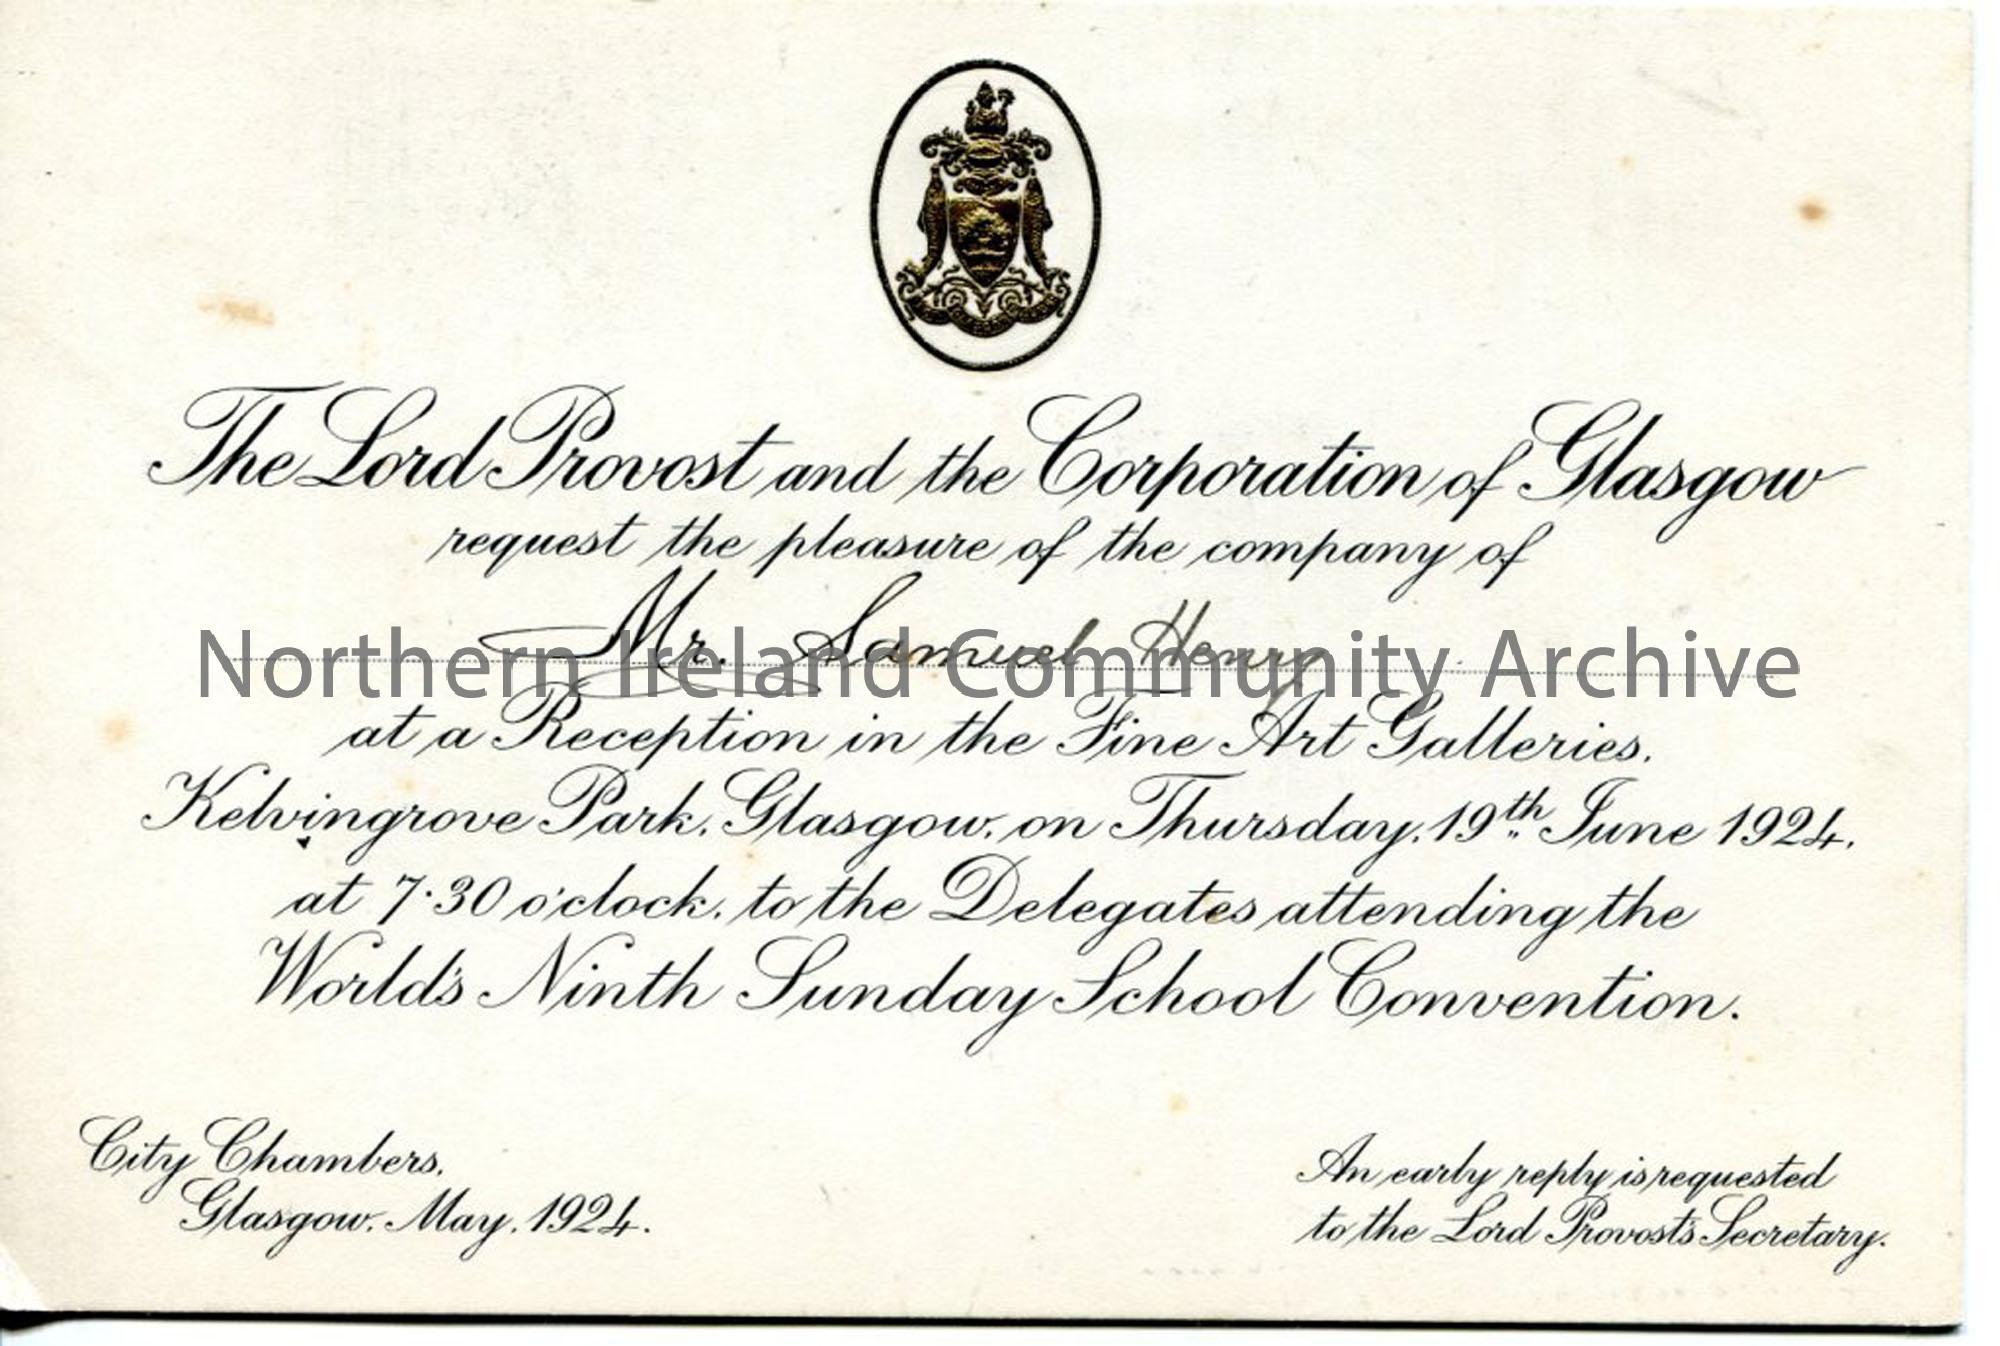 Invitation to Sam Henry from the Lord Provost and Corporation of Glasgow